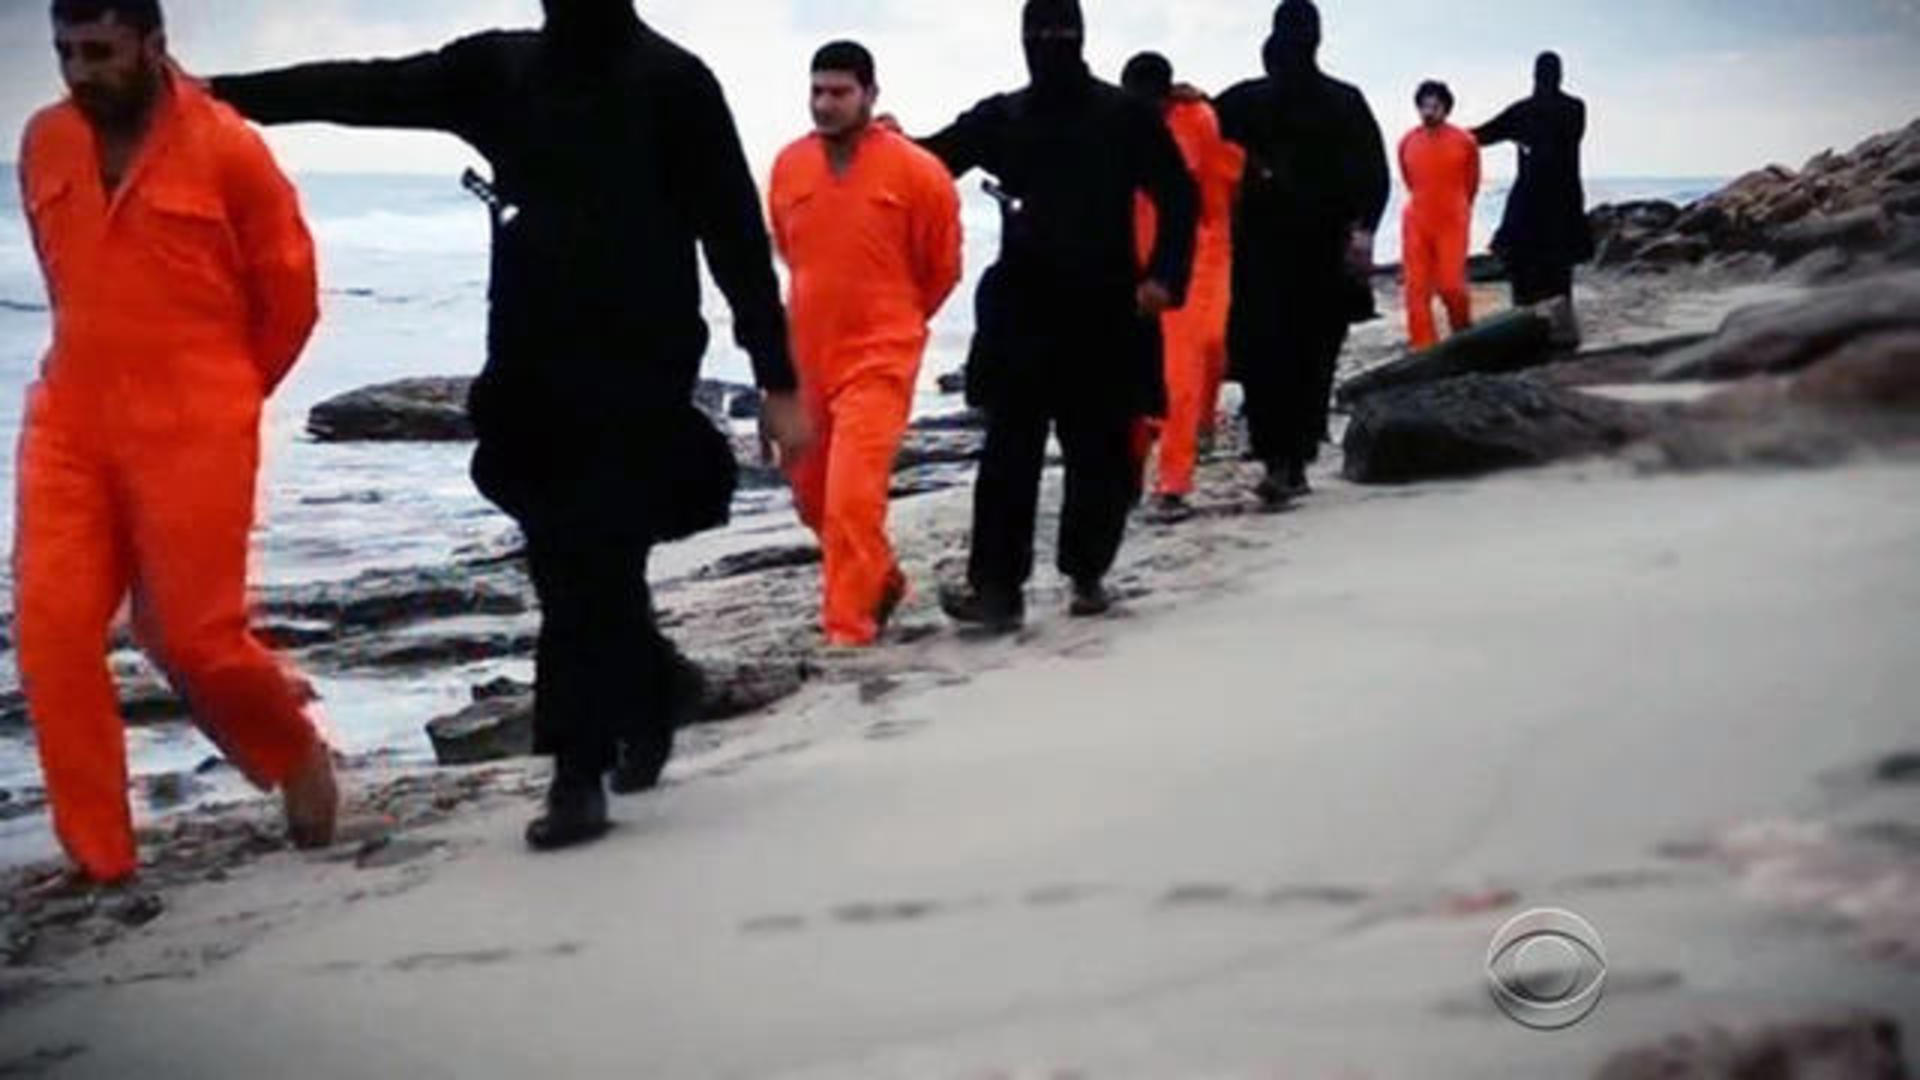 ahmed aboubasha recommends isis drowning full video pic